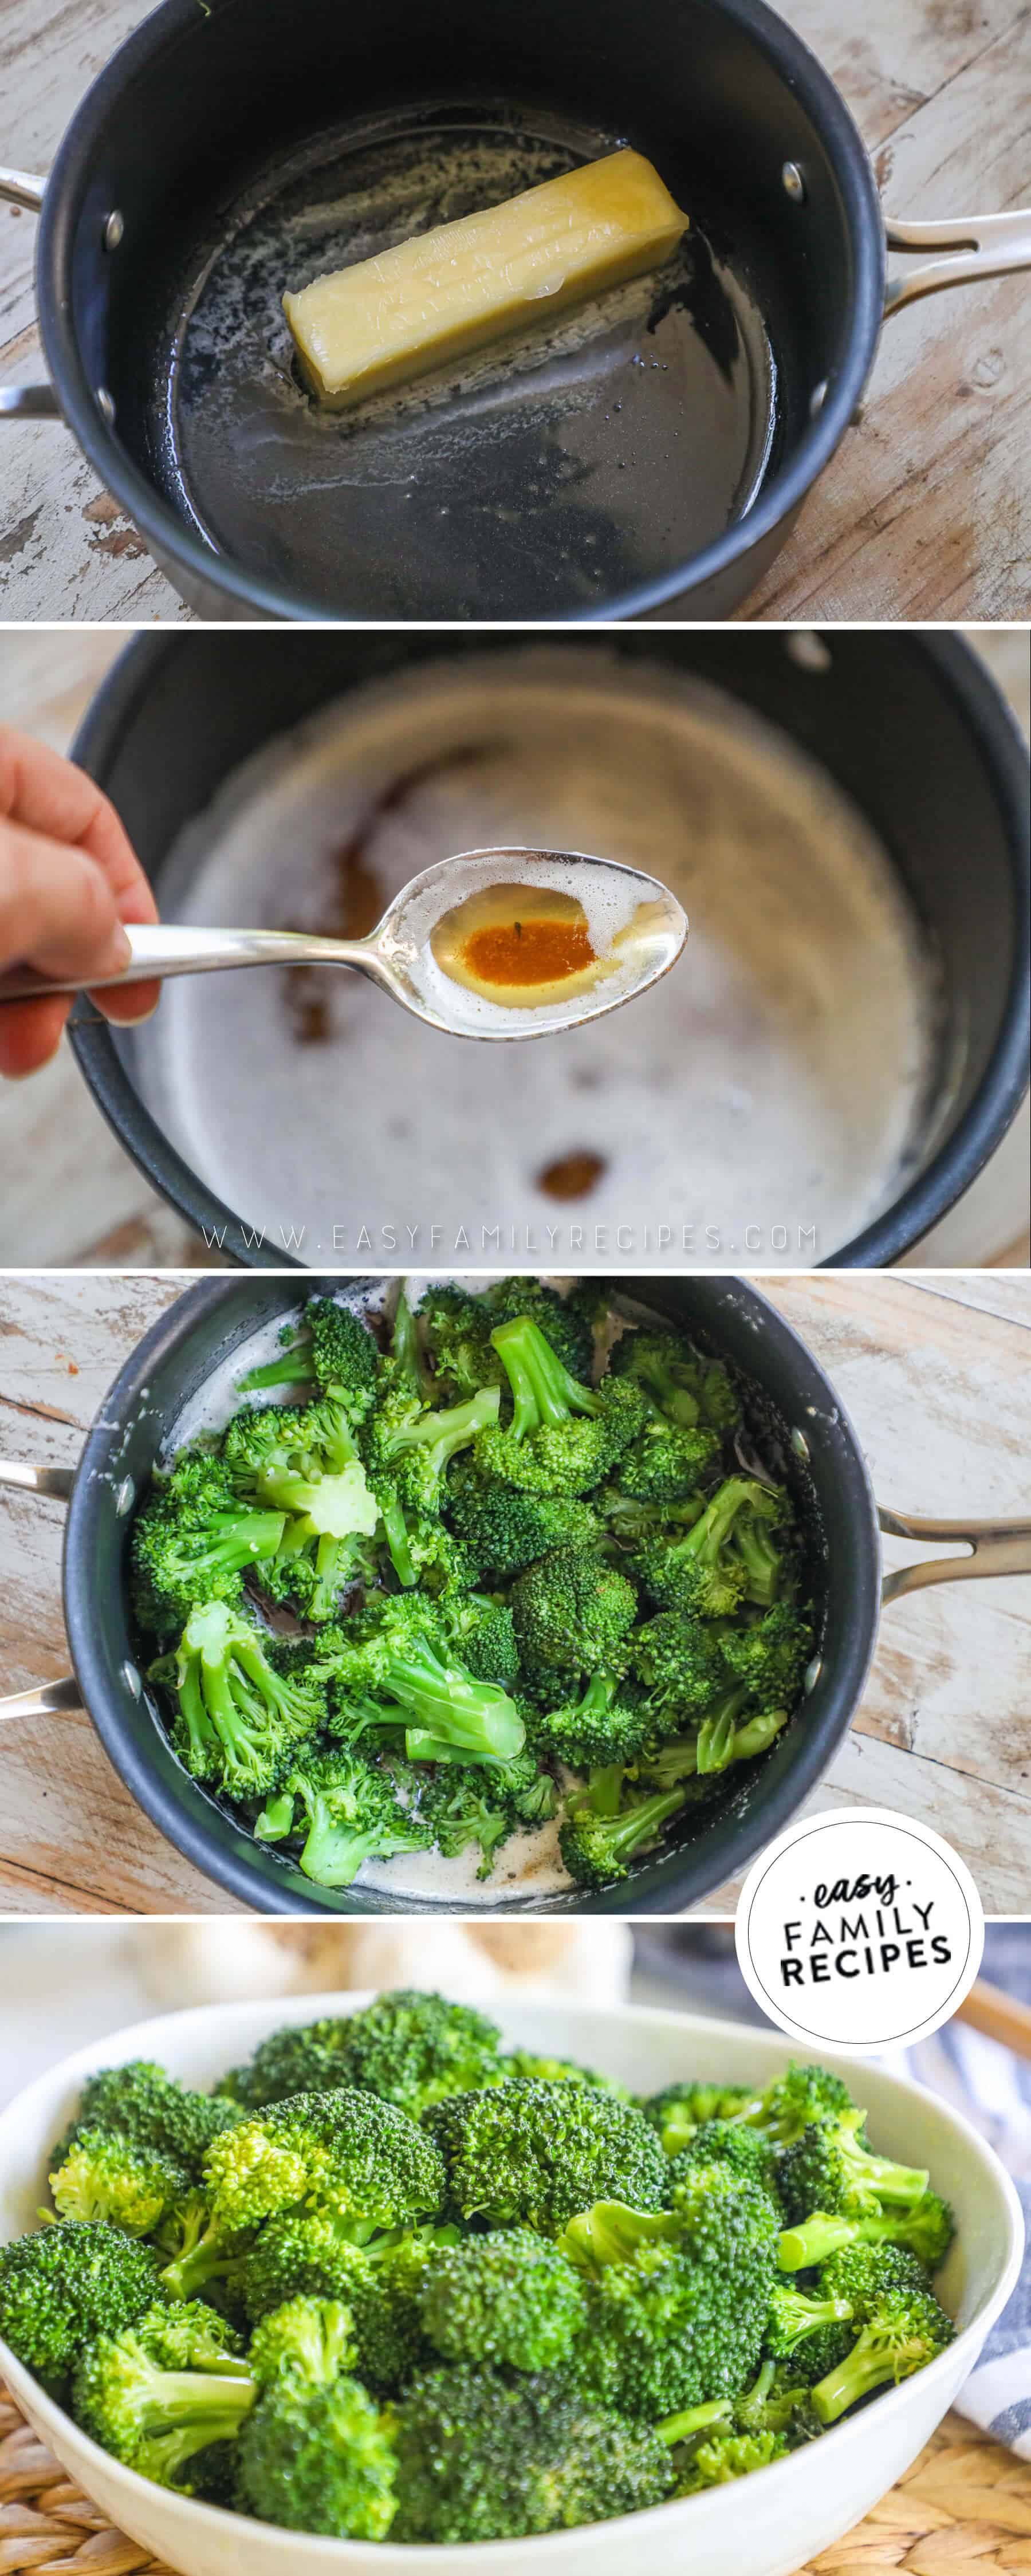 Steps to make recipe, 1 melt butter in a saucepan, 2 cook until brown, 3 toss in steamed broccoli, 4 add to serving bowl.